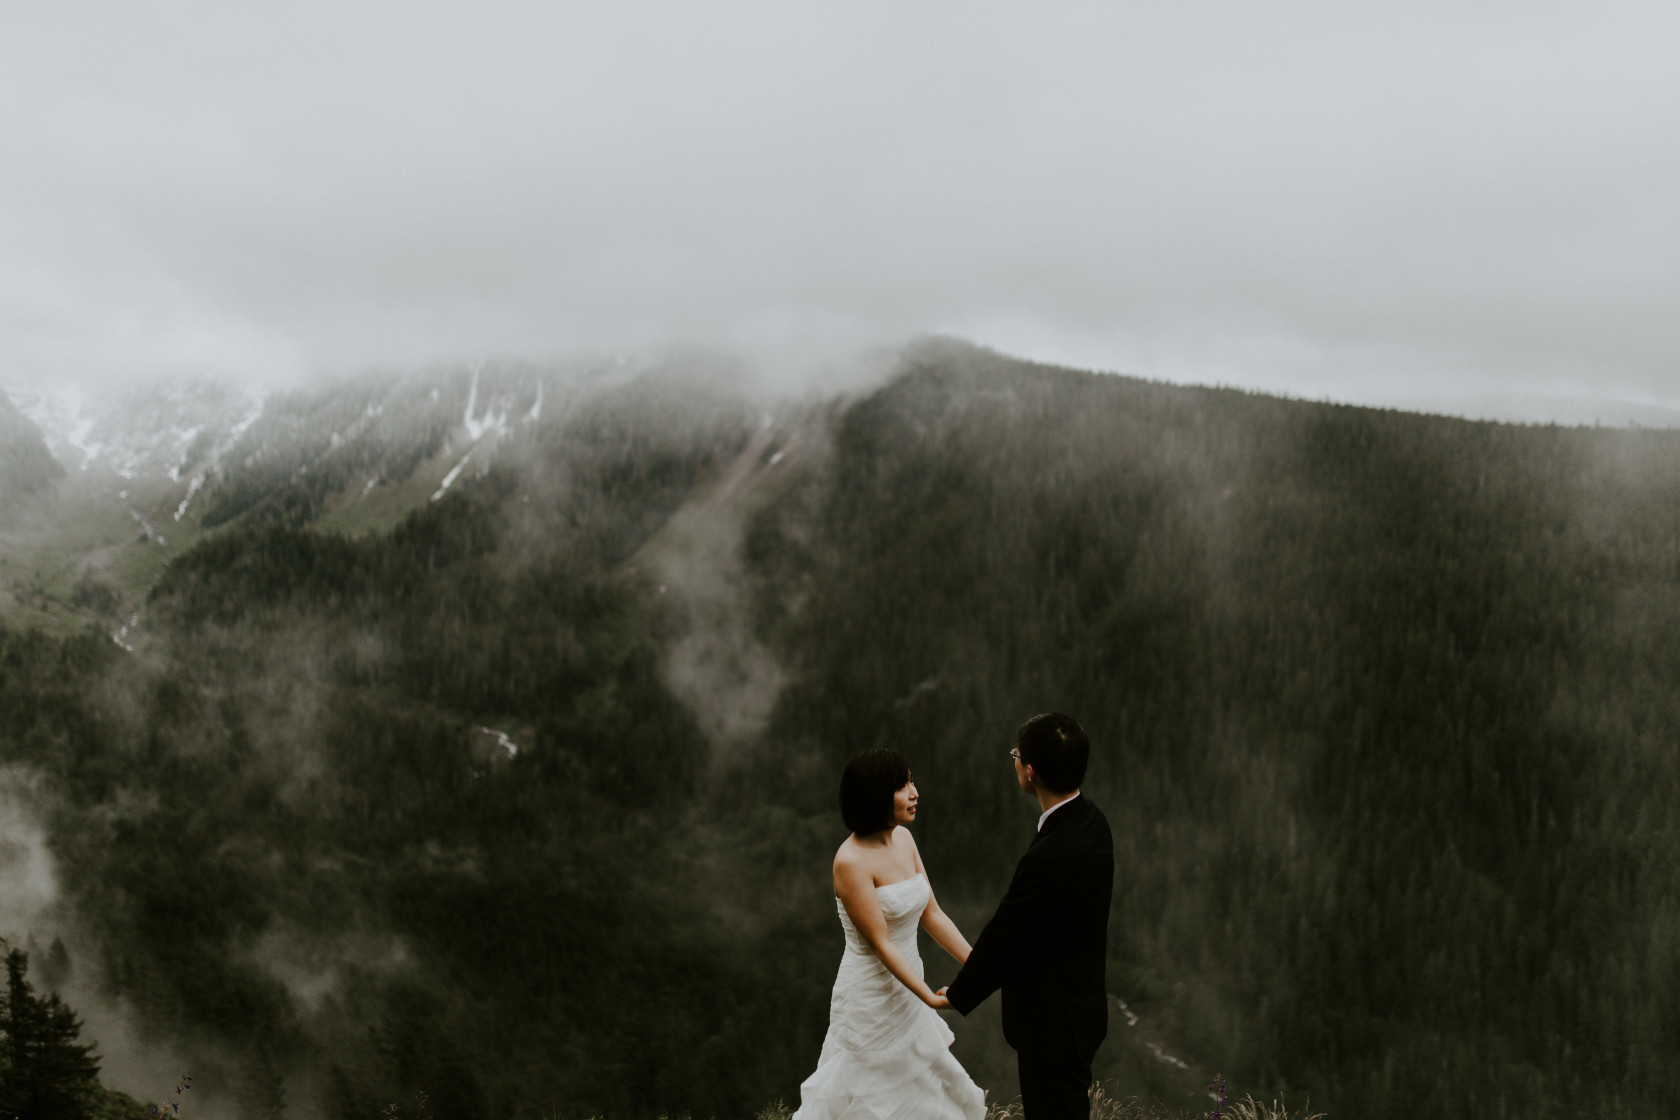 Alex and Valerie hold hands. Elopement wedding photography at Mount Hood by Sienna Plus Josh.